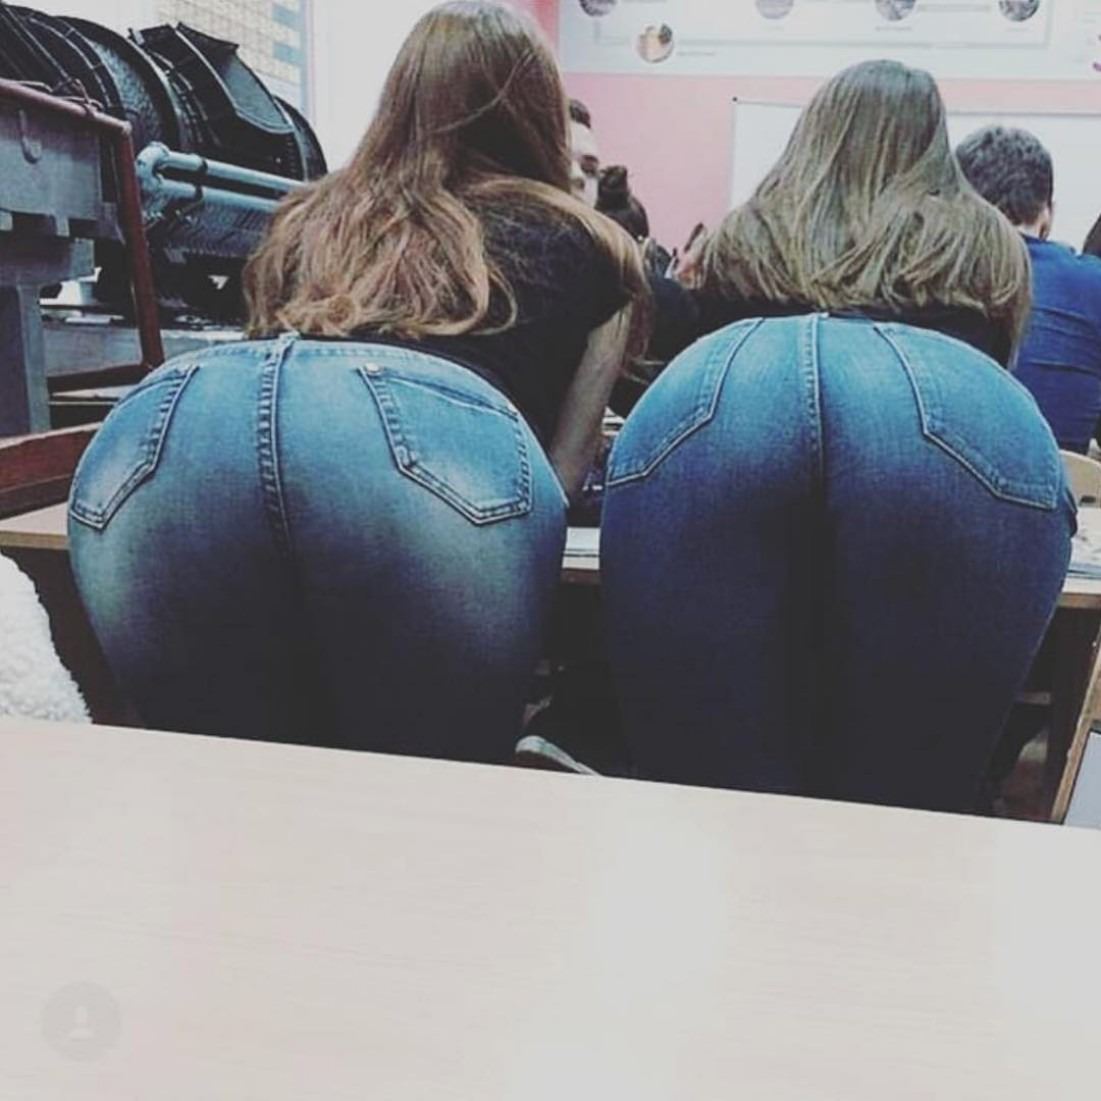 A nice pair of jeans